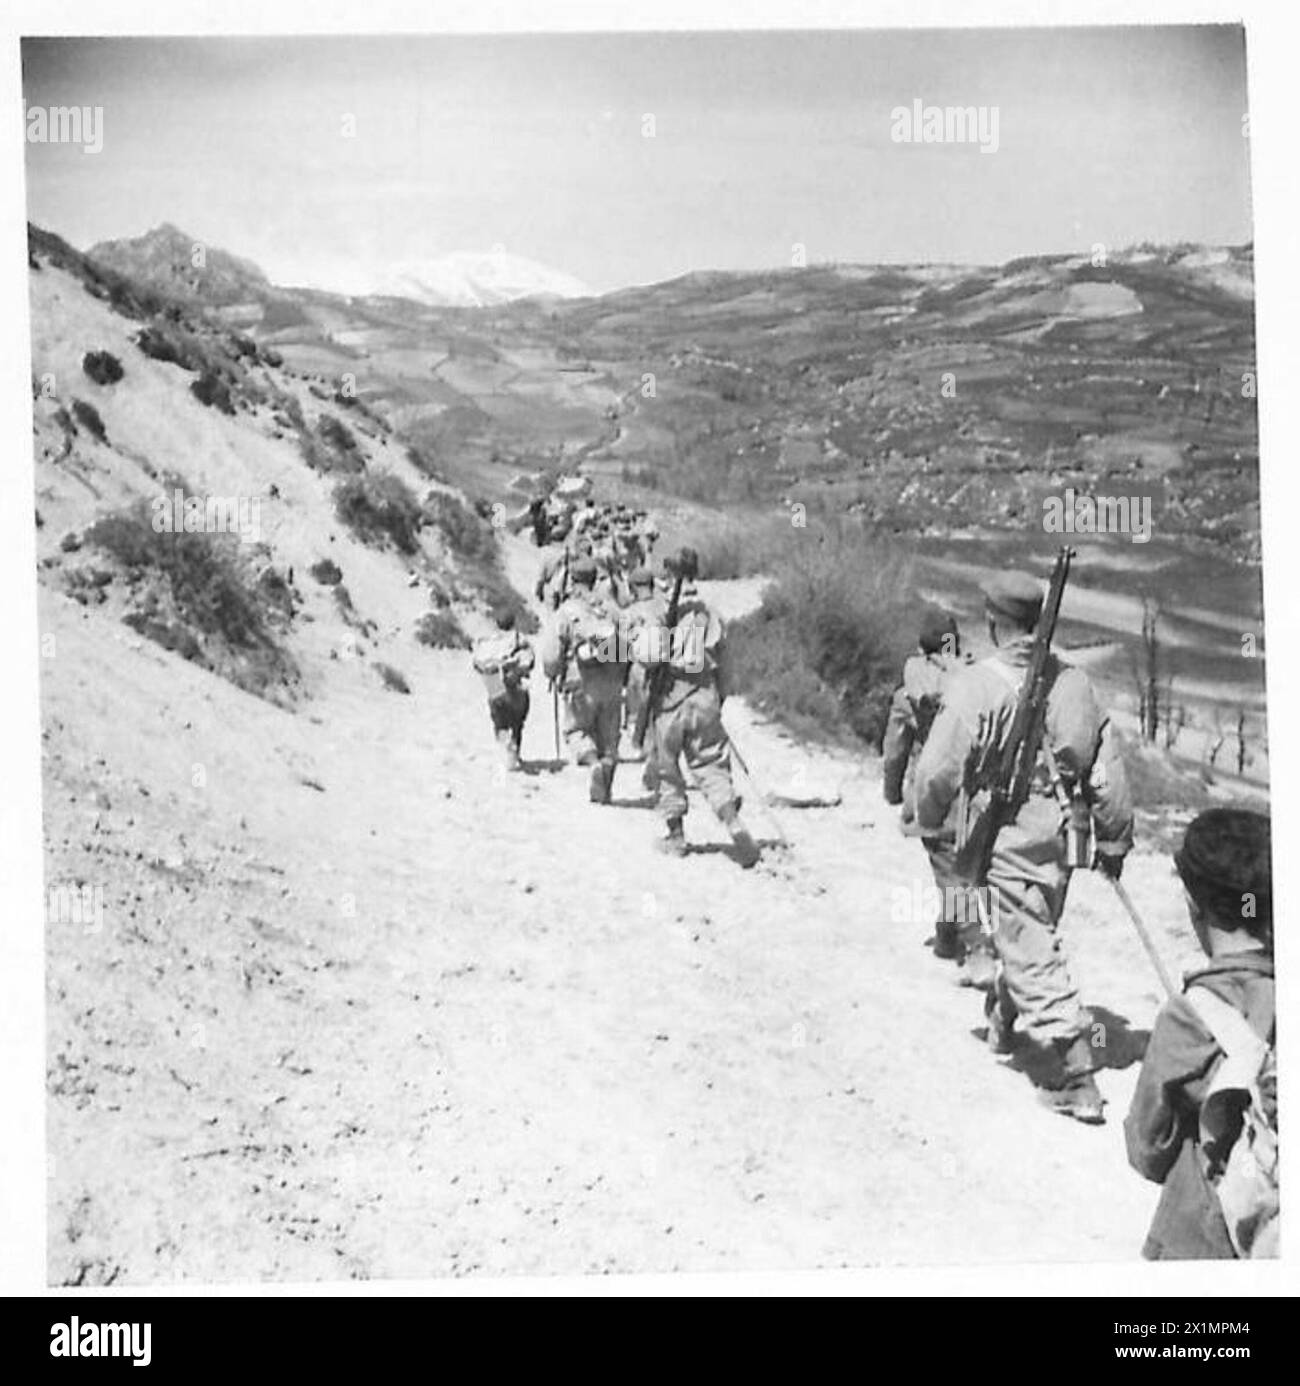 ITALY : AN APPENINE PATROL - The patrol climbs steadily upwards into the Appenines. The steep path is strewn with rocks and several stops are called by the patrol commander, British Army Stock Photo